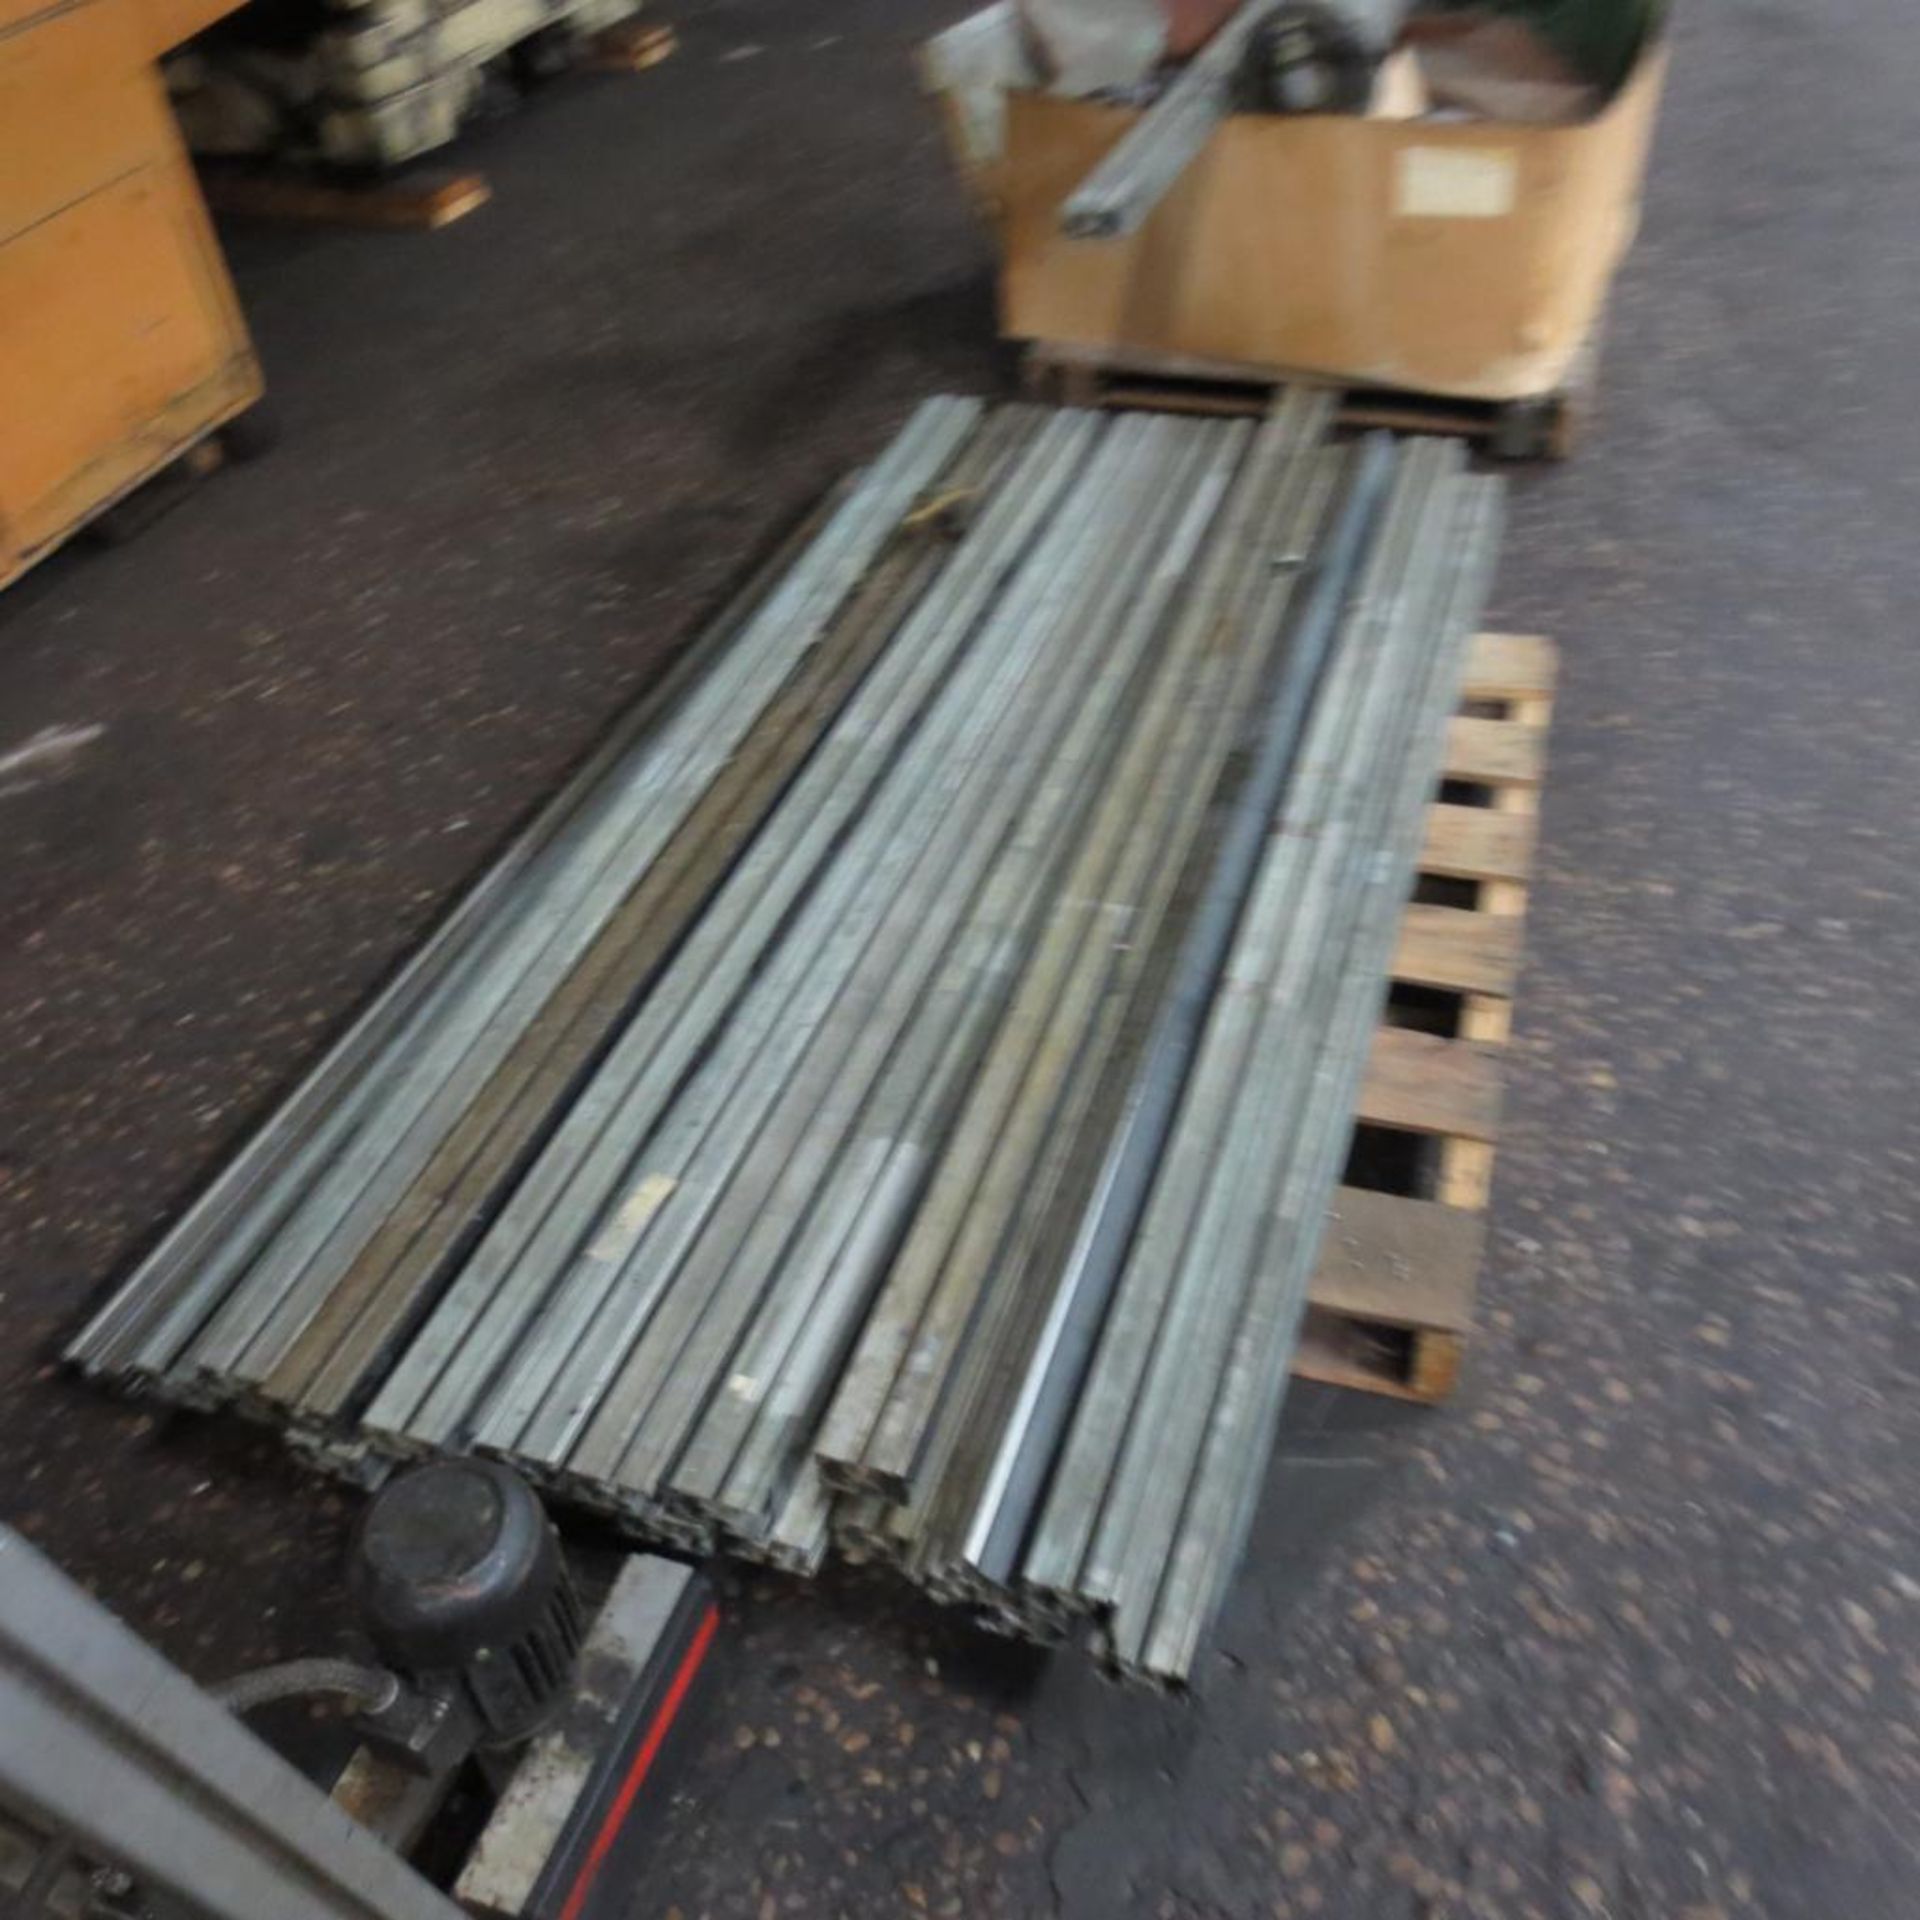 Row of Aluminum Frame for Conveyors and Fencing and Orange Fence. Loading Fee is $150.00 - Image 4 of 5